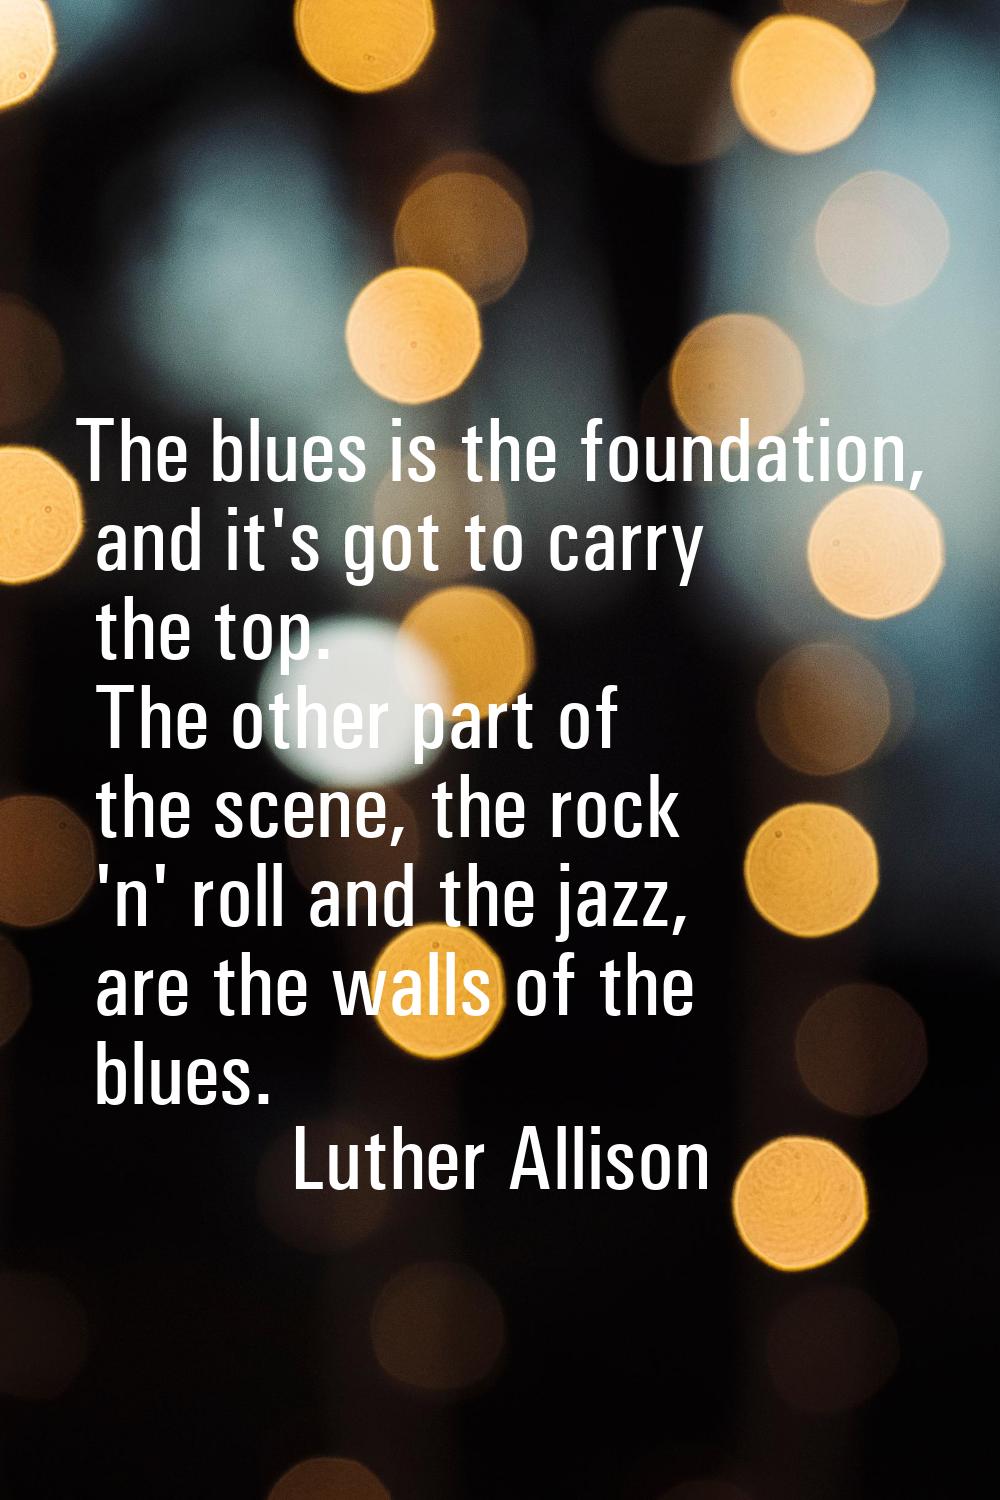 The blues is the foundation, and it's got to carry the top. The other part of the scene, the rock '